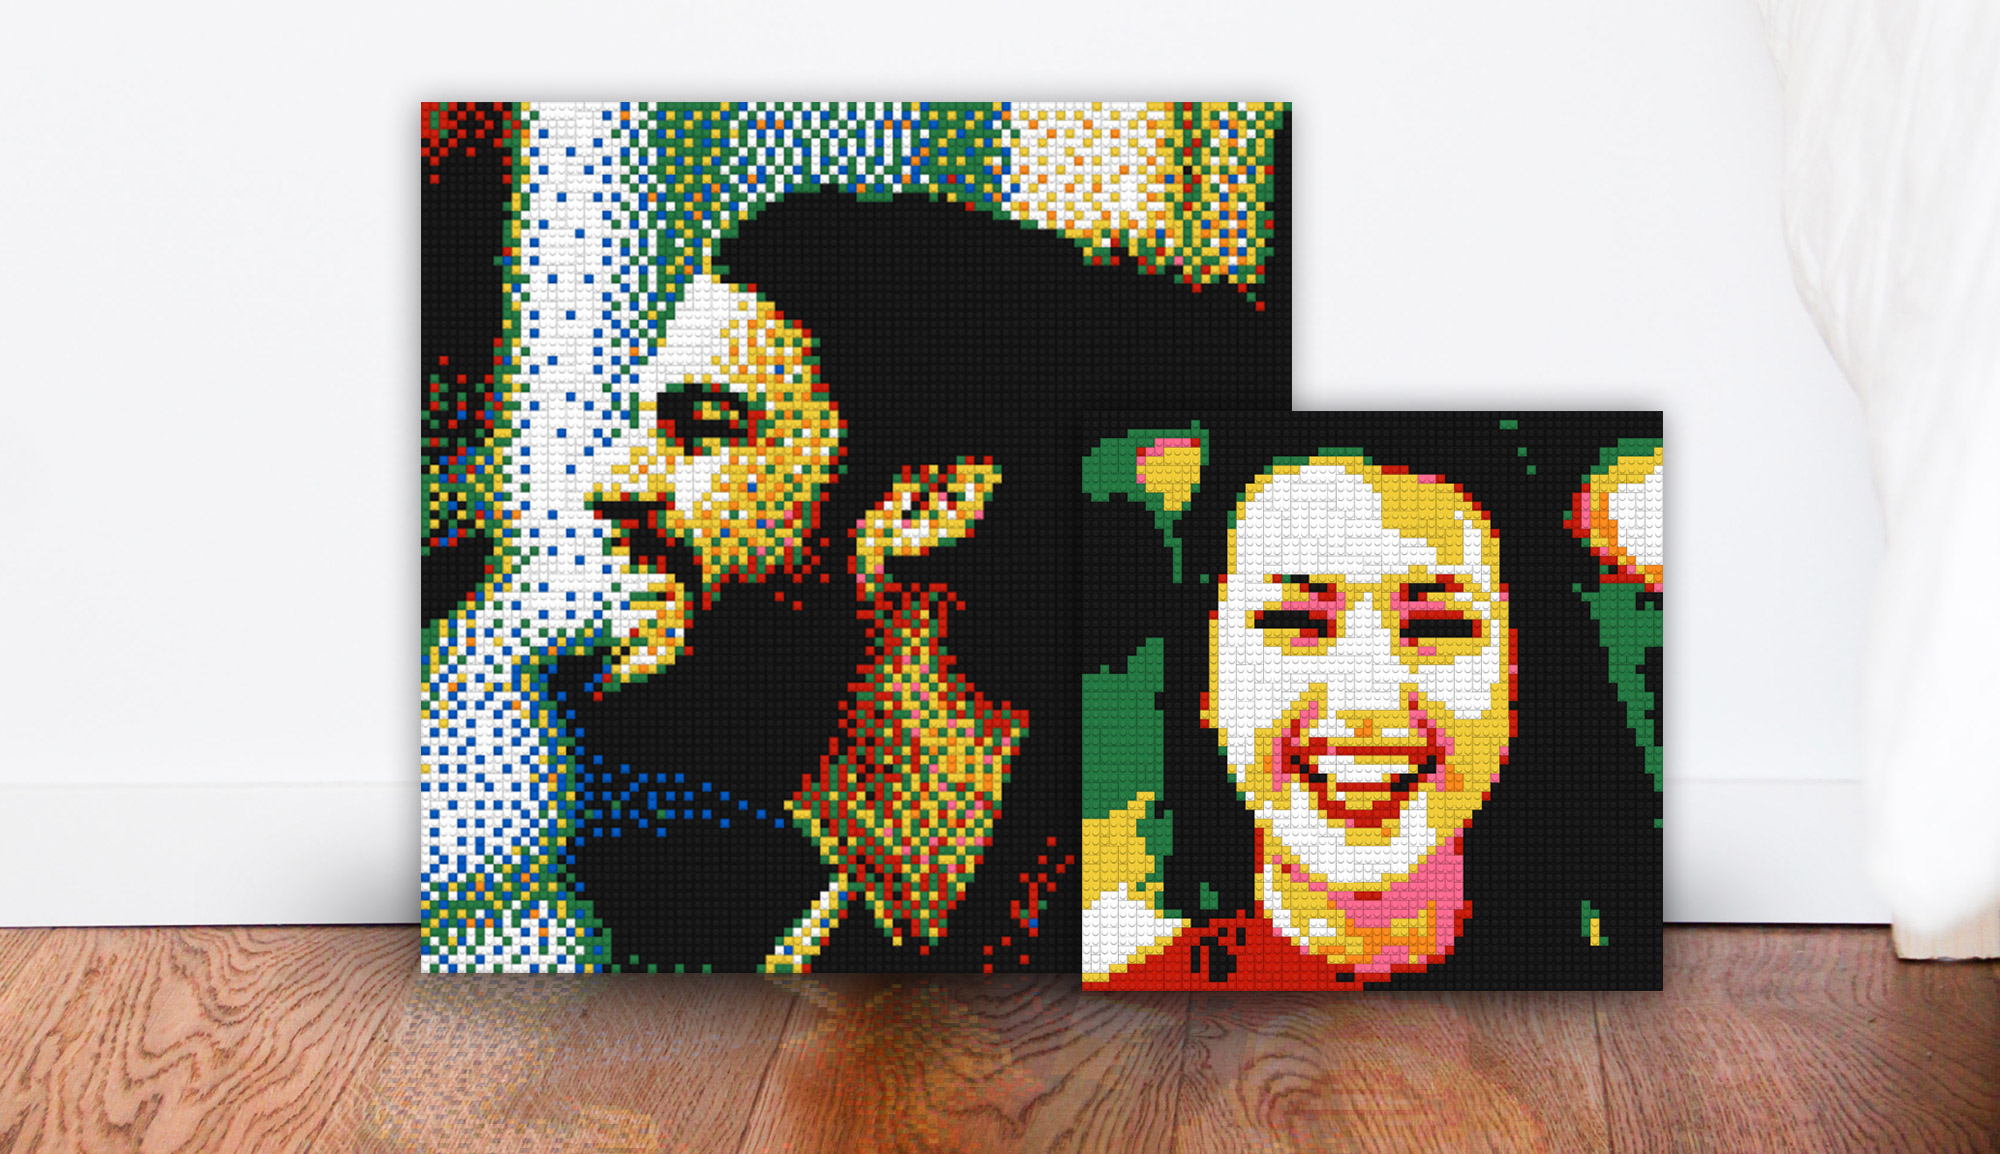 Lego picture mosaic people